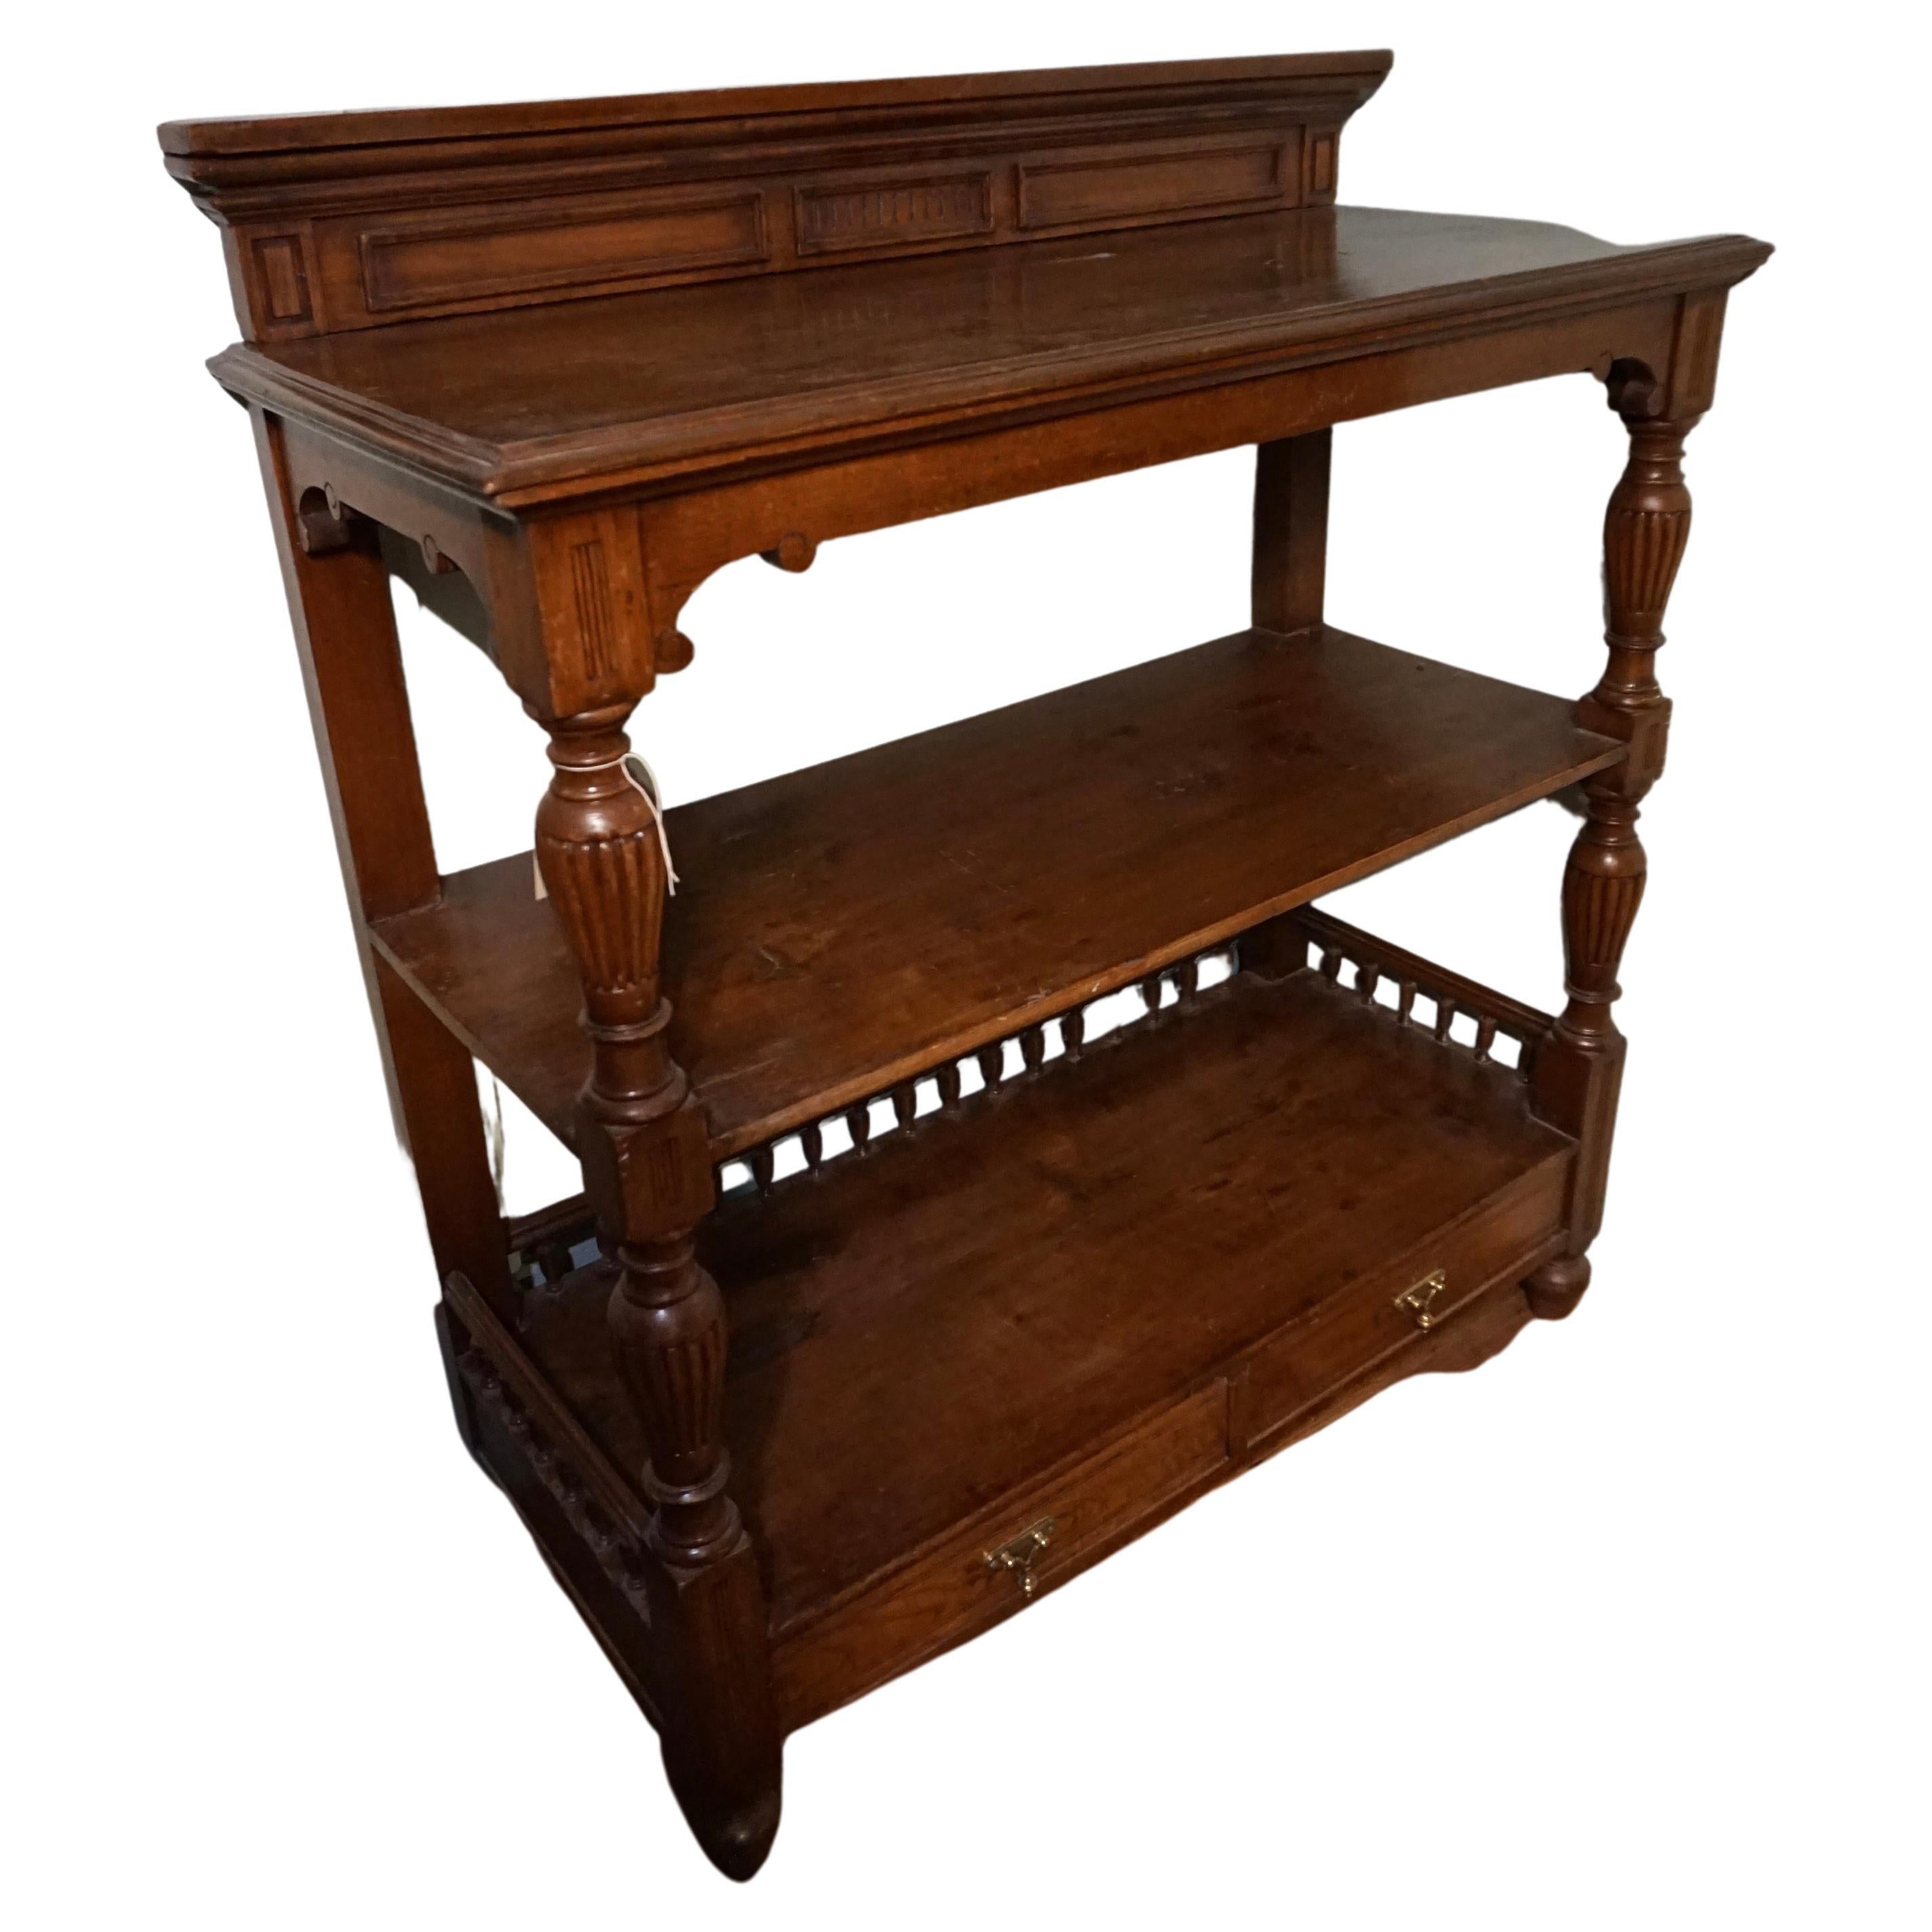 British Colonial solid Teak whatnot stand with shelves in good condition. Hand carved fluted vase columns with crown moulding and drawers. Brass hardware with tear drop handles. Aesthetic and functional piece which can be repurposed as a TV stand,